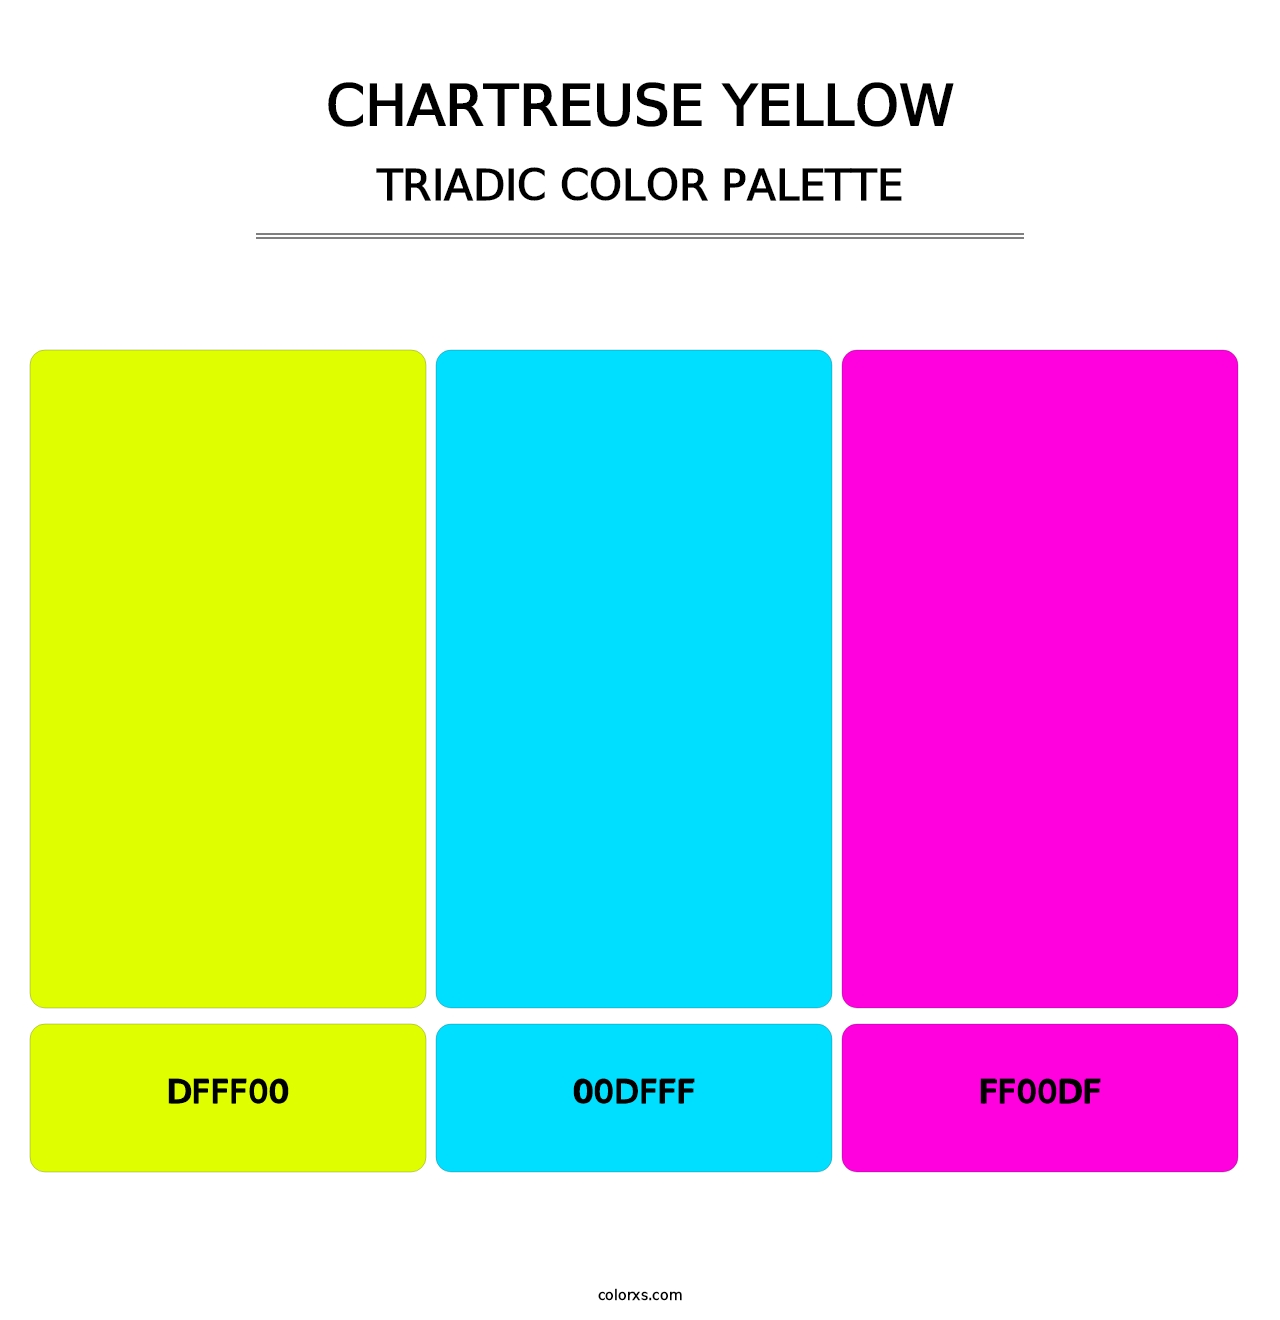 Chartreuse Yellow - Triadic Color Palette